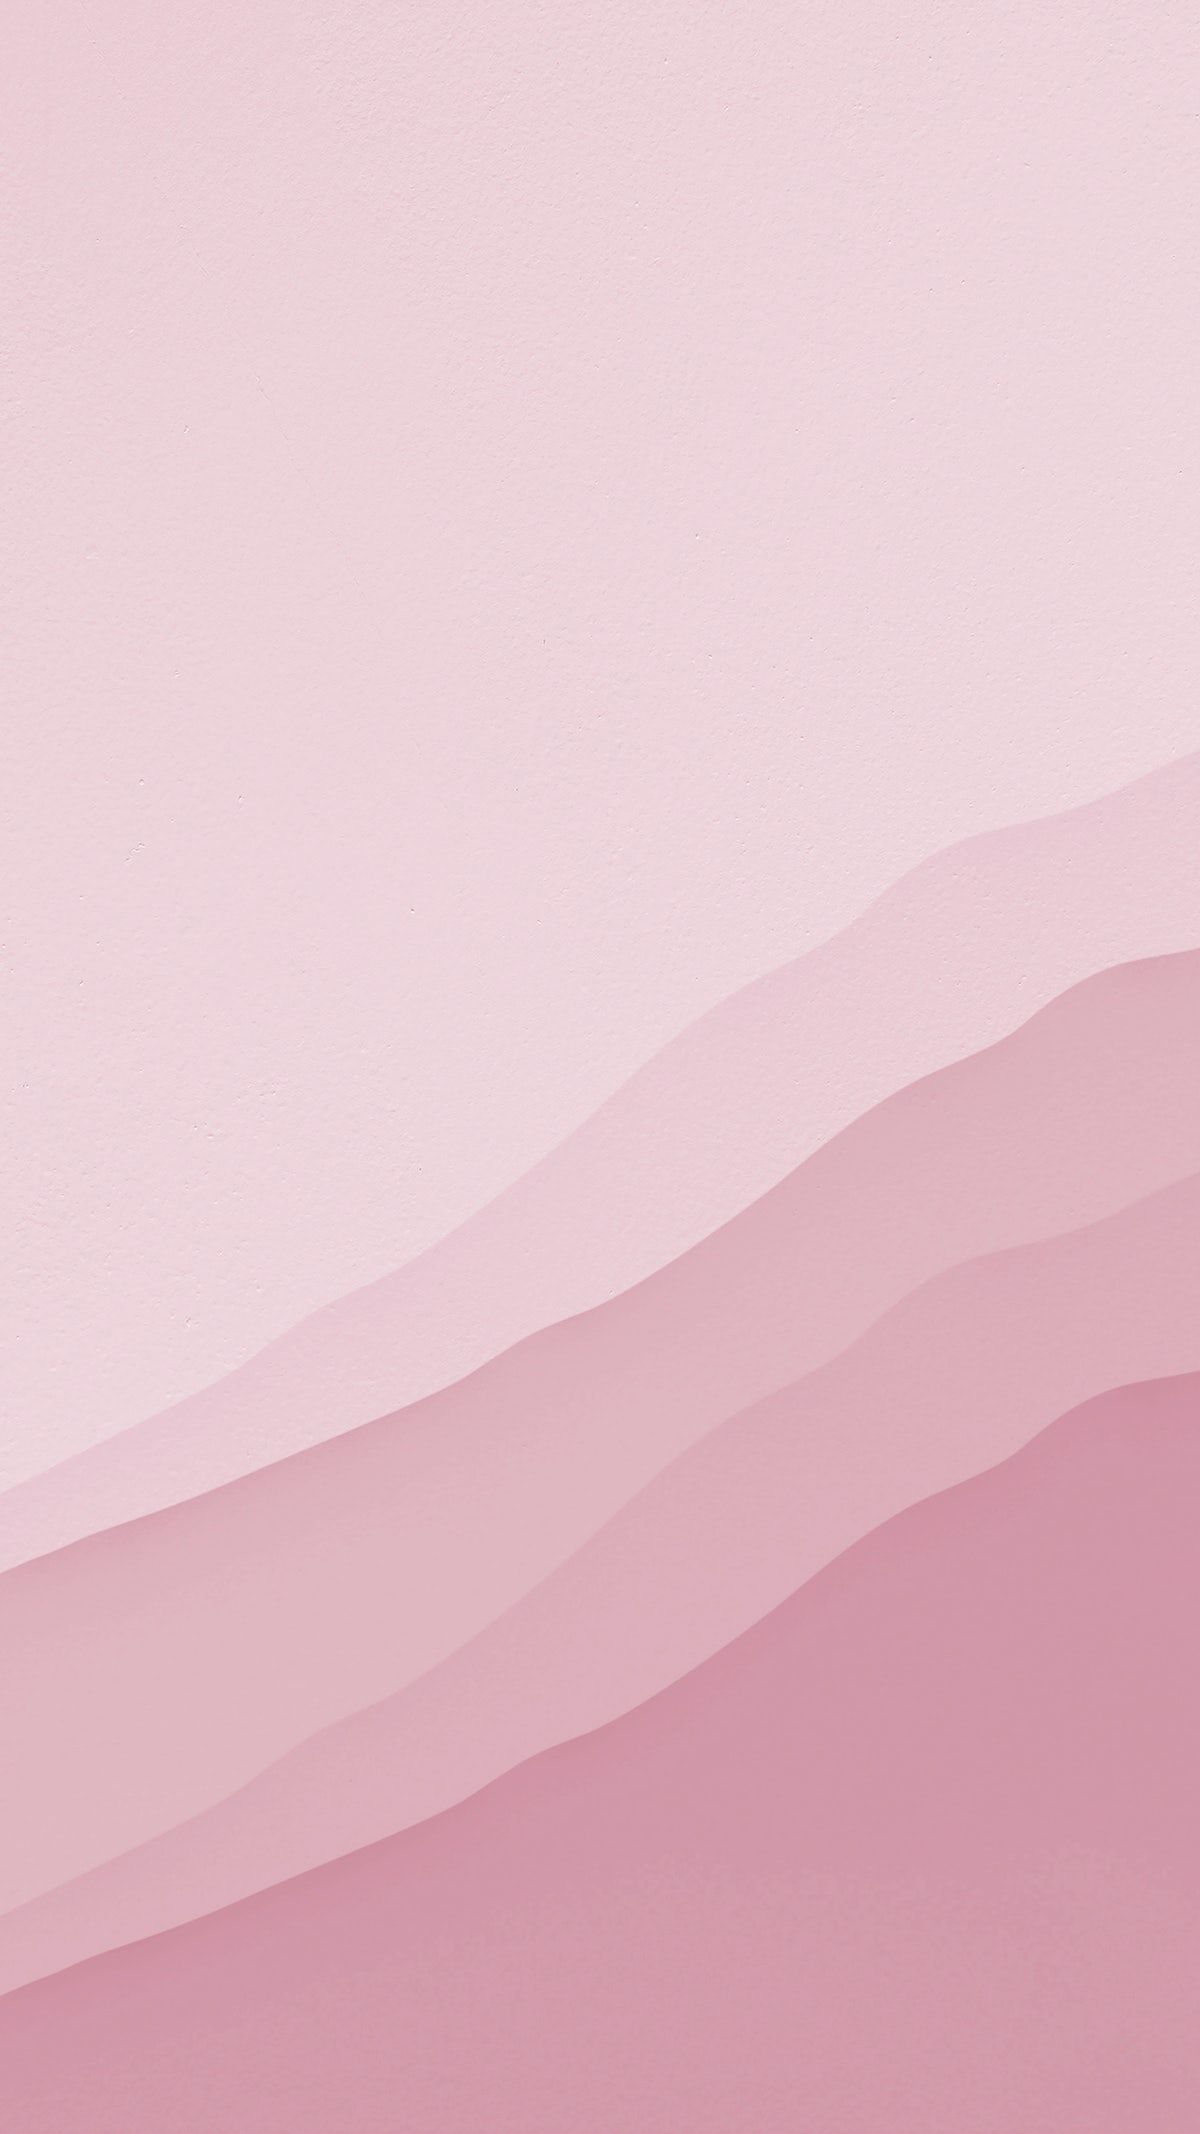 Download premium image of Abstract background light pink wallpaper image by Nunny about pink, abstract, abstract background, aesthetic, and android wallpaper 2620213